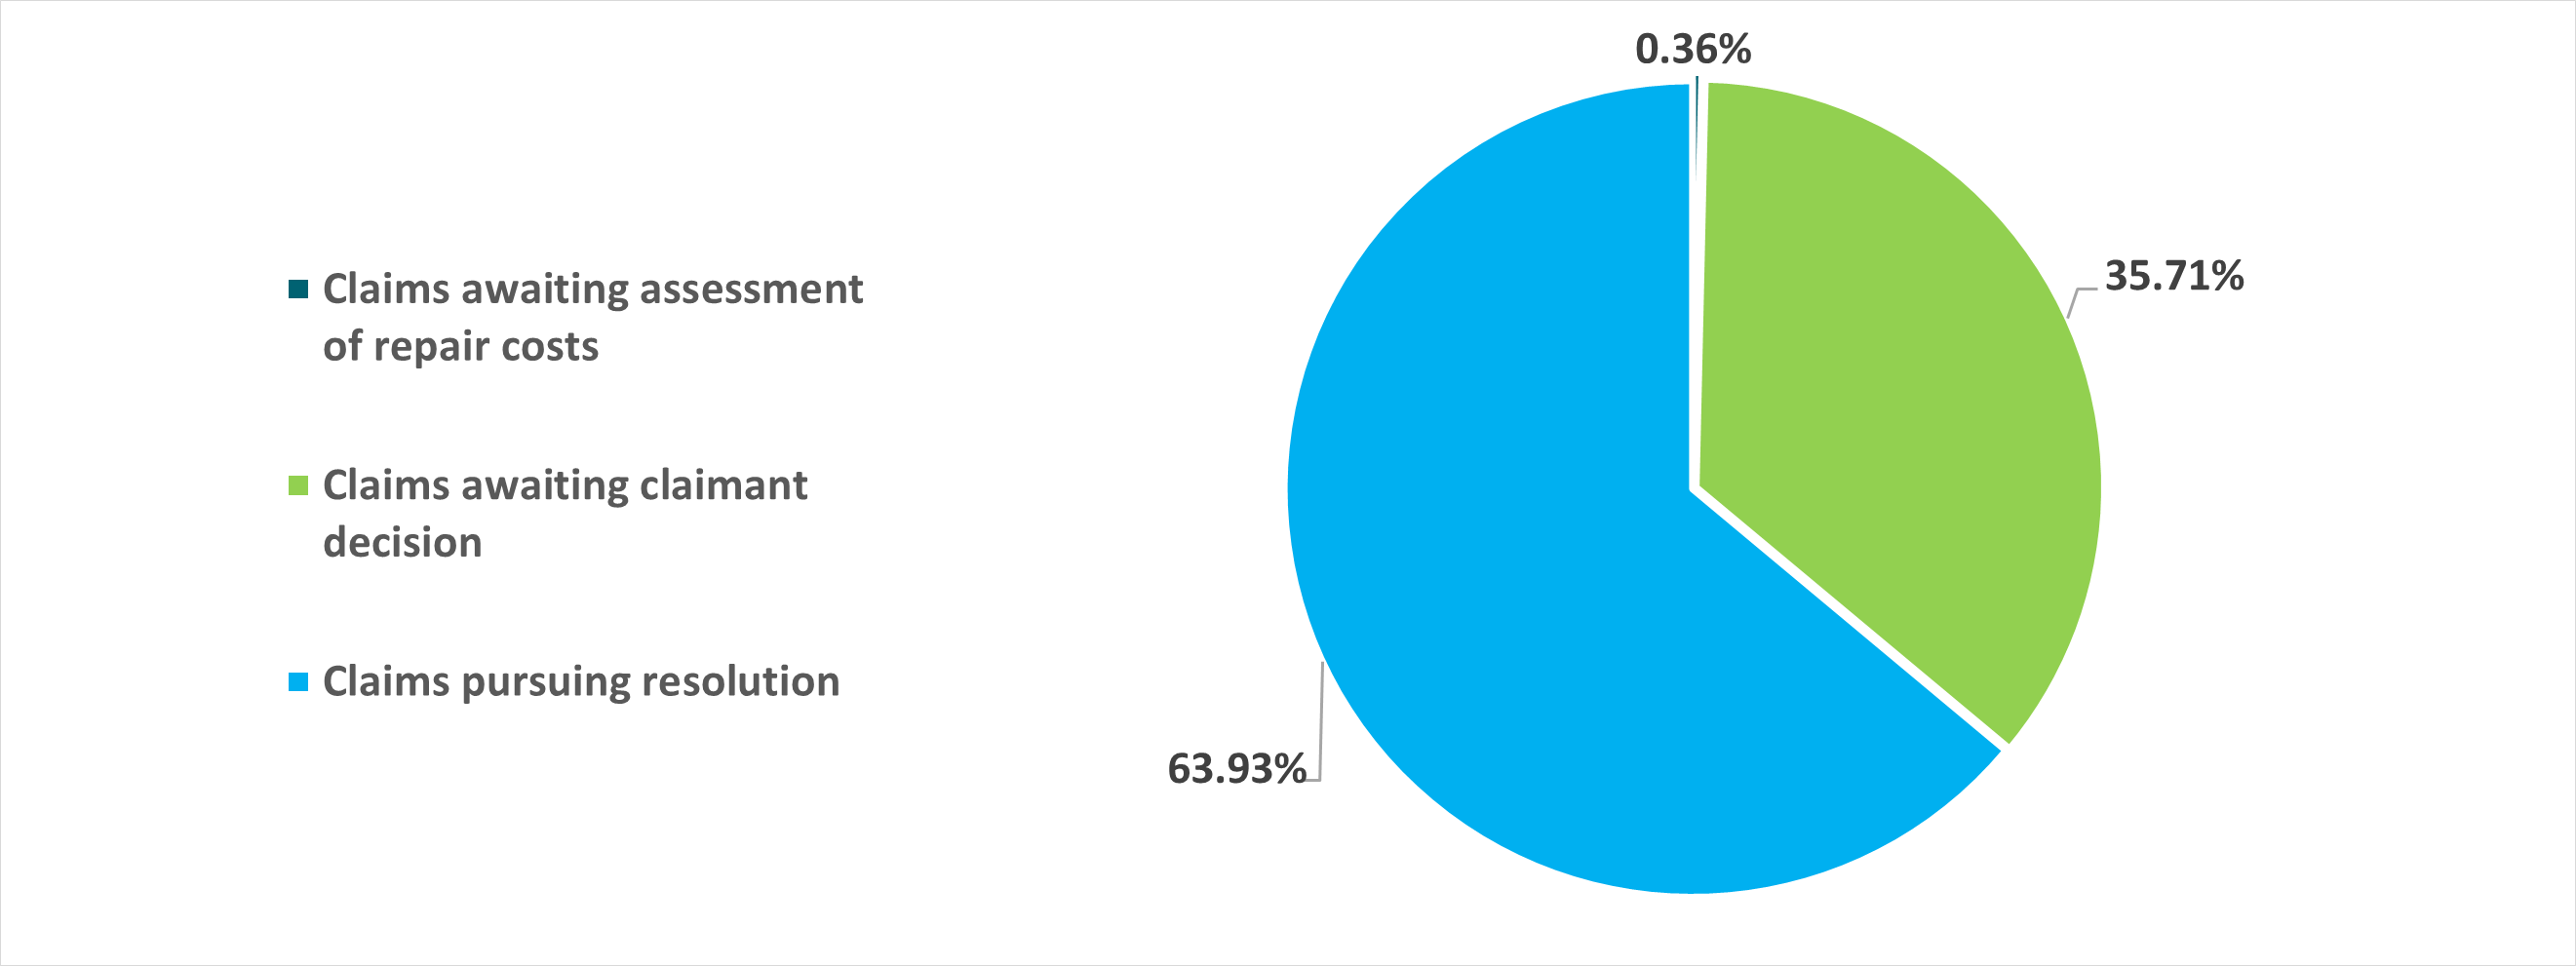 Pie chart displaying the data listed below